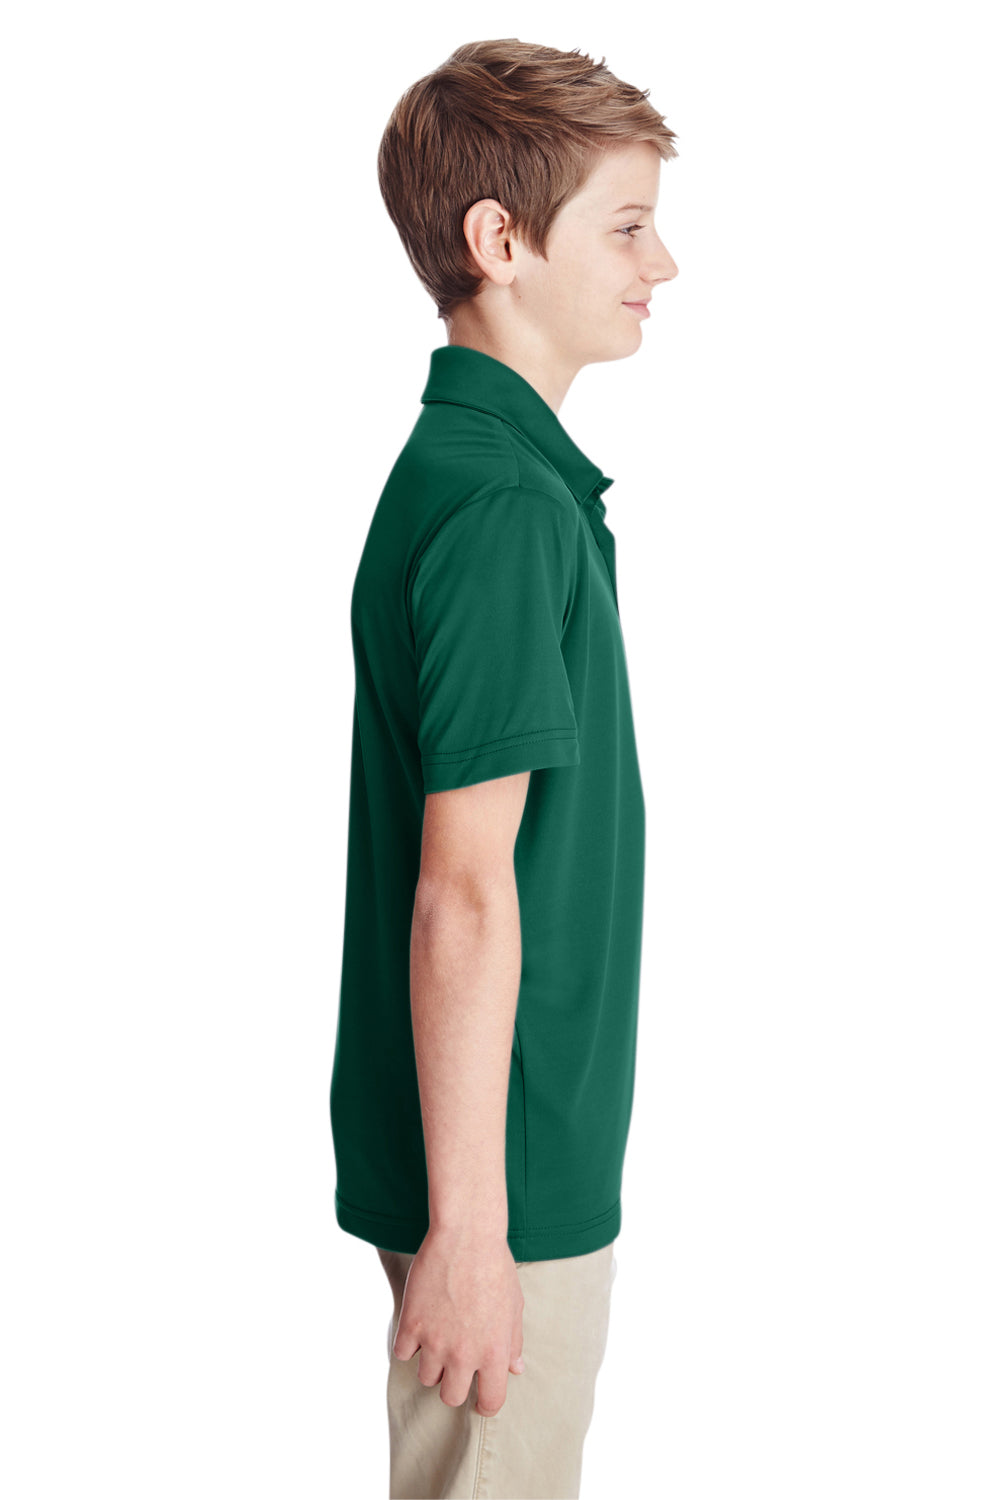 Team 365 TT51Y Youth Zone Performance Moisture Wicking Short Sleeve Polo Shirt Forest Green Side